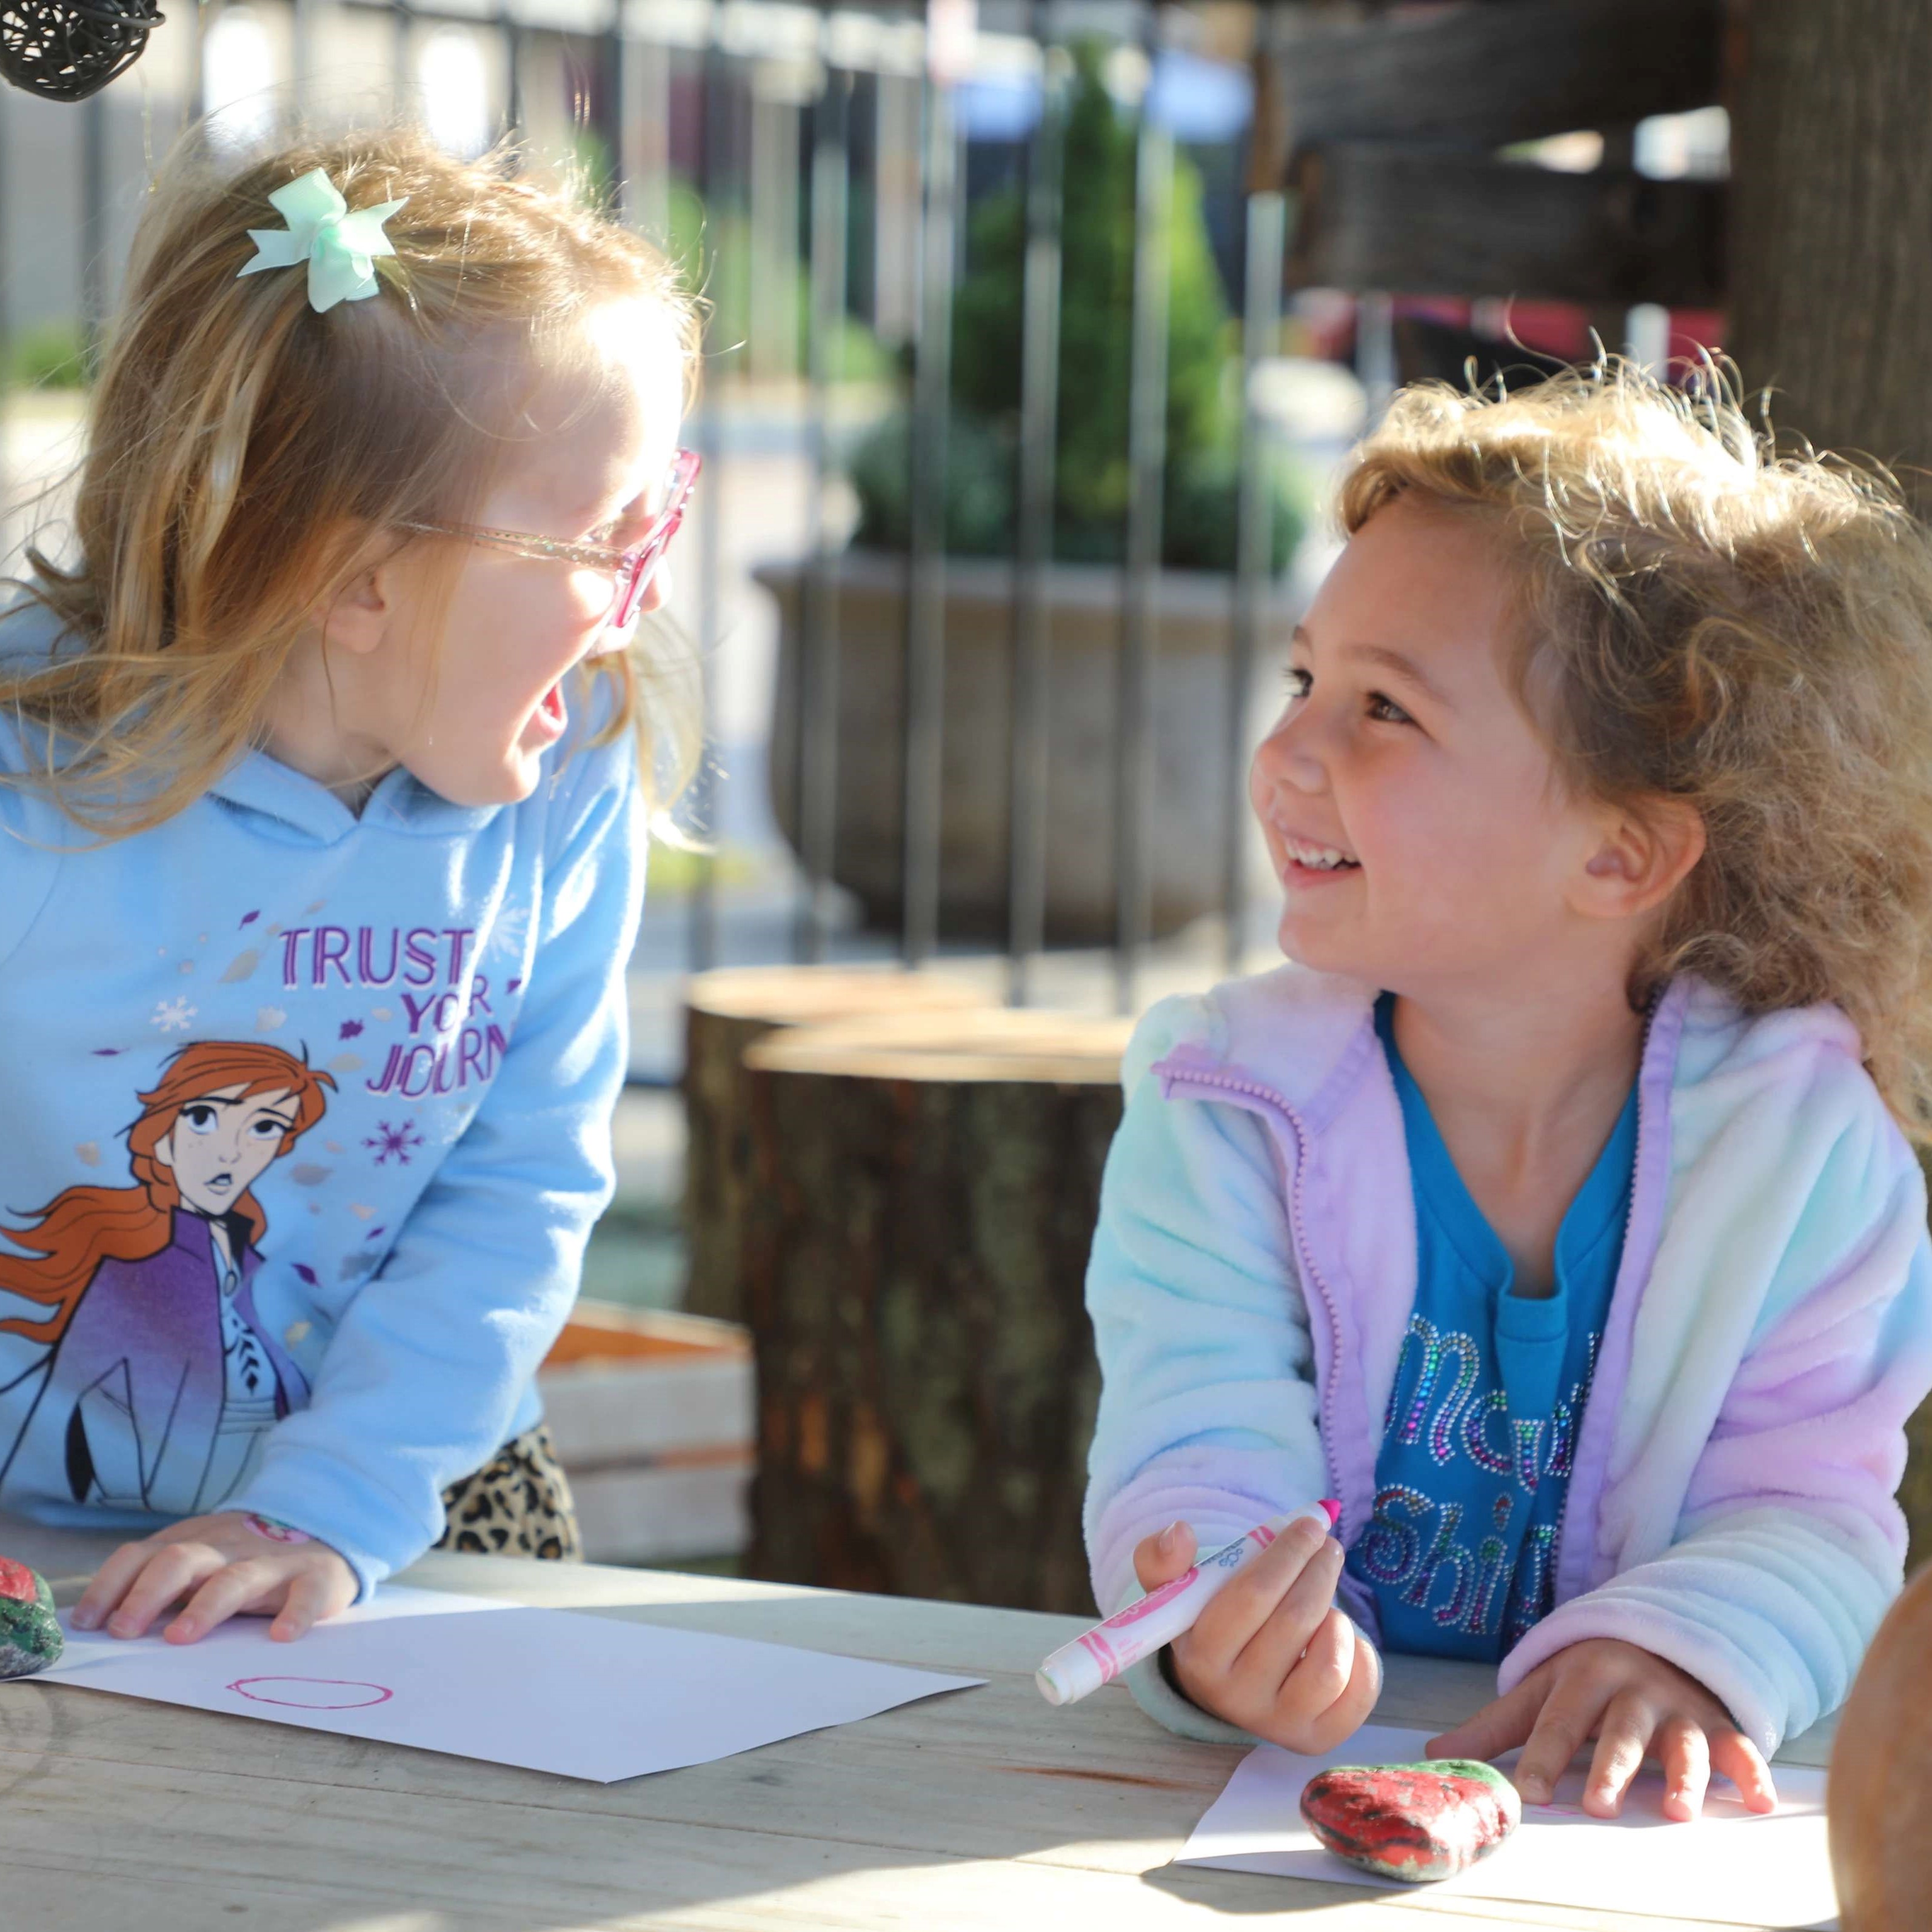 Two young girls smile and laugh at each other as they draw outside